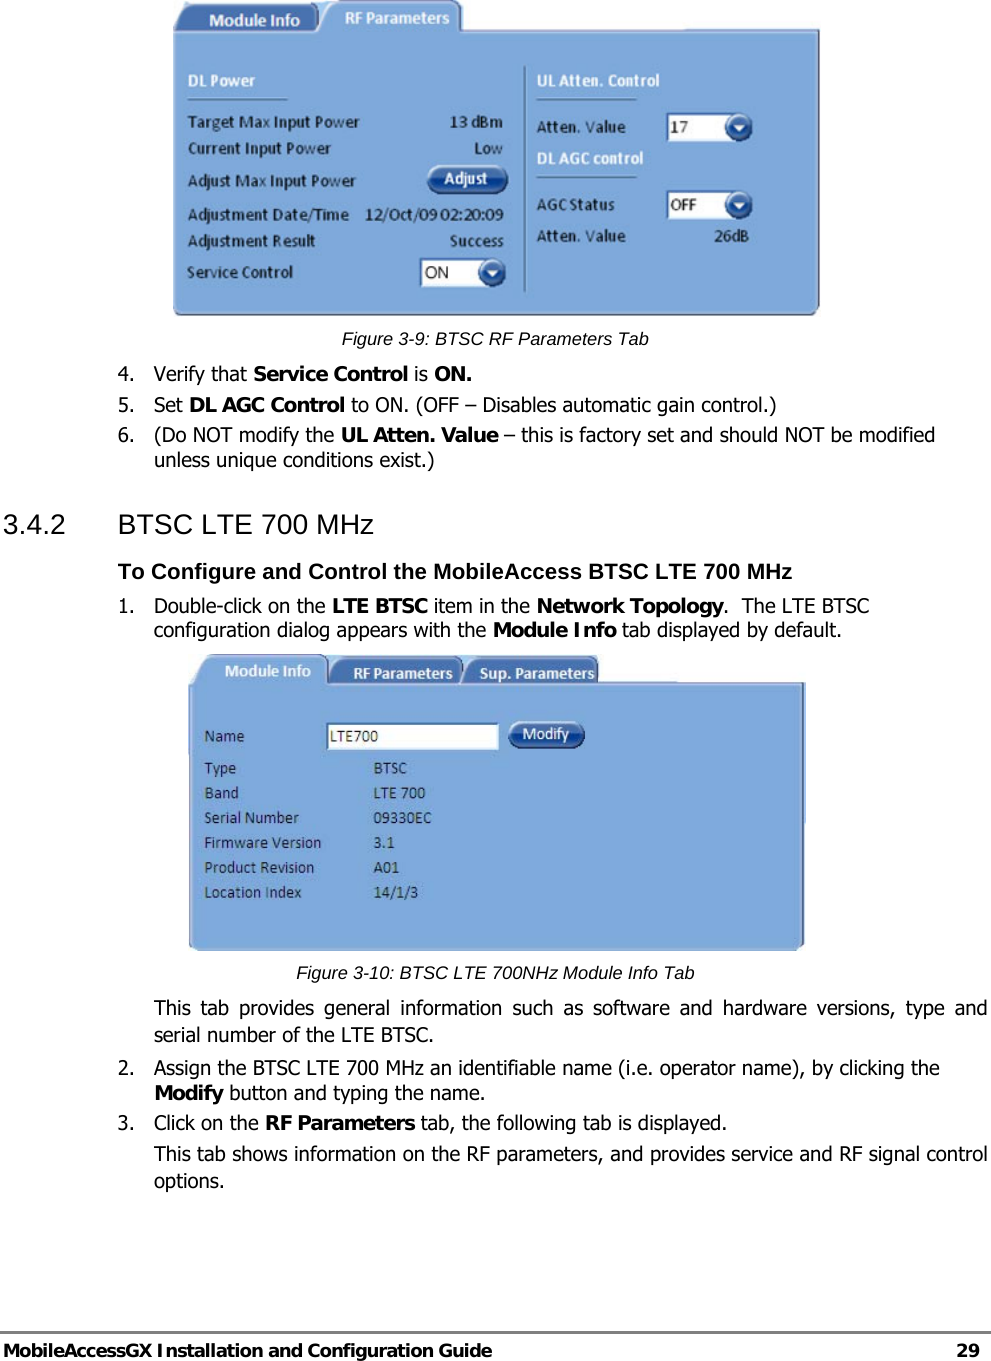   MobileAccessGX Installation and Configuration Guide   29   Figure 3-9: BTSC RF Parameters Tab 4. Verify that Service Control is ON.  5. Set DL AGC Control to ON. (OFF – Disables automatic gain control.) 6.  (Do NOT modify the UL Atten. Value – this is factory set and should NOT be modified unless unique conditions exist.) 3.4.2  BTSC LTE 700 MHz To Configure and Control the MobileAccess BTSC LTE 700 MHz 1.  Double-click on the LTE BTSC item in the Network Topology.  The LTE BTSC configuration dialog appears with the Module Info tab displayed by default.   Figure 3-10: BTSC LTE 700NHz Module Info Tab This tab provides general information such as software and hardware versions, type and serial number of the LTE BTSC. 2.  Assign the BTSC LTE 700 MHz an identifiable name (i.e. operator name), by clicking the Modify button and typing the name.  3. Click on the RF Parameters tab, the following tab is displayed. This tab shows information on the RF parameters, and provides service and RF signal control options. 